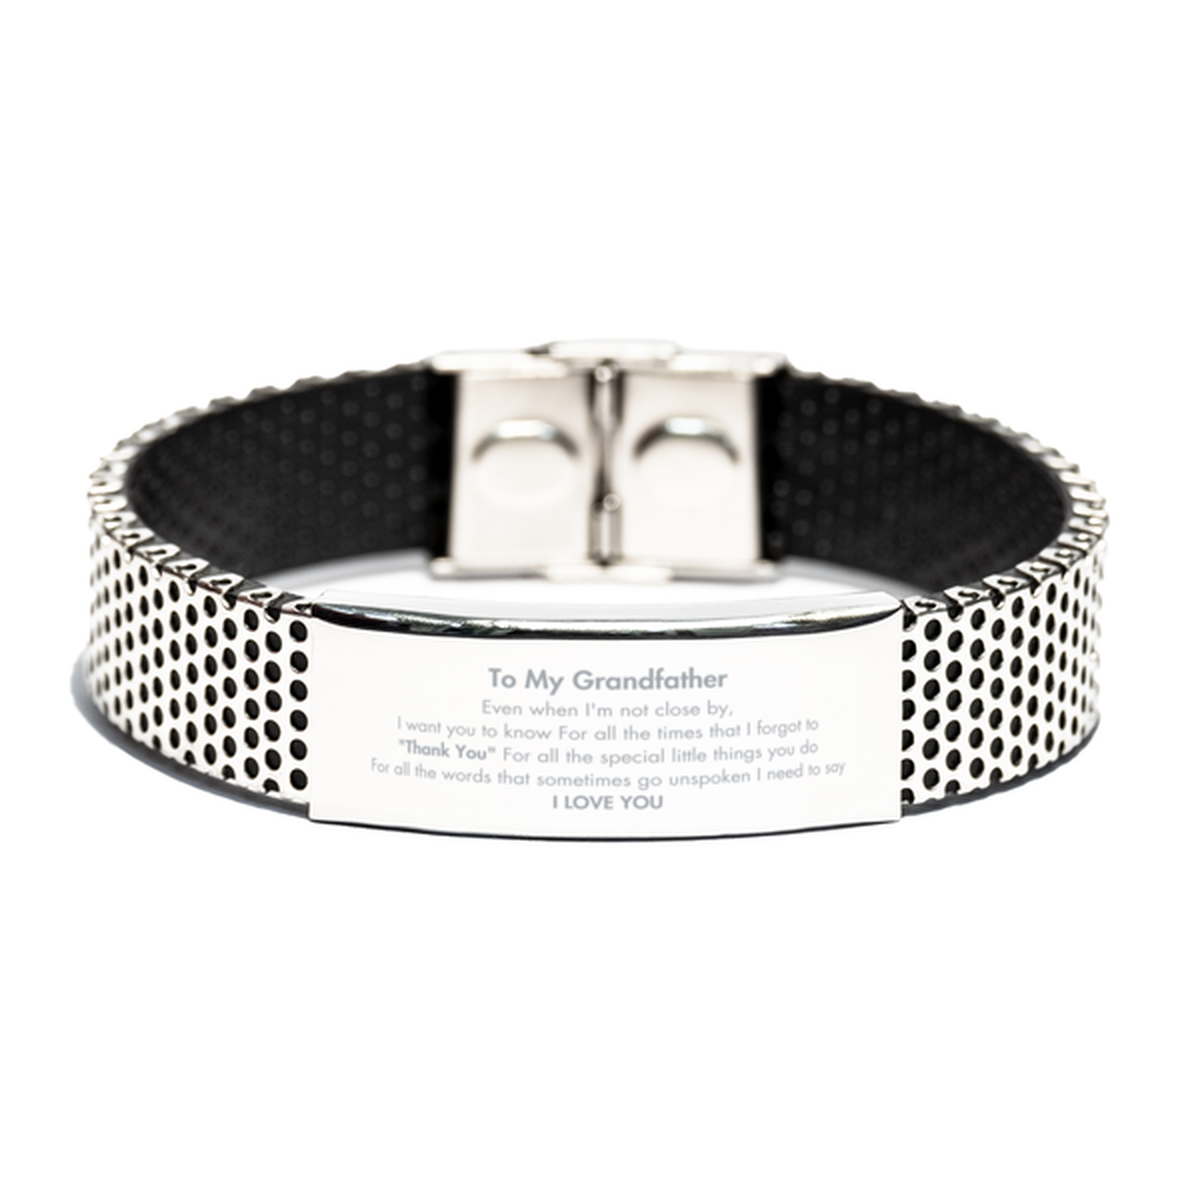 Thank You Gifts for Grandfather, Keepsake Stainless Steel Bracelet Gifts for Grandfather Birthday Mother's day Father's Day Grandfather For all the words That sometimes go unspoken I need to say I LOVE YOU